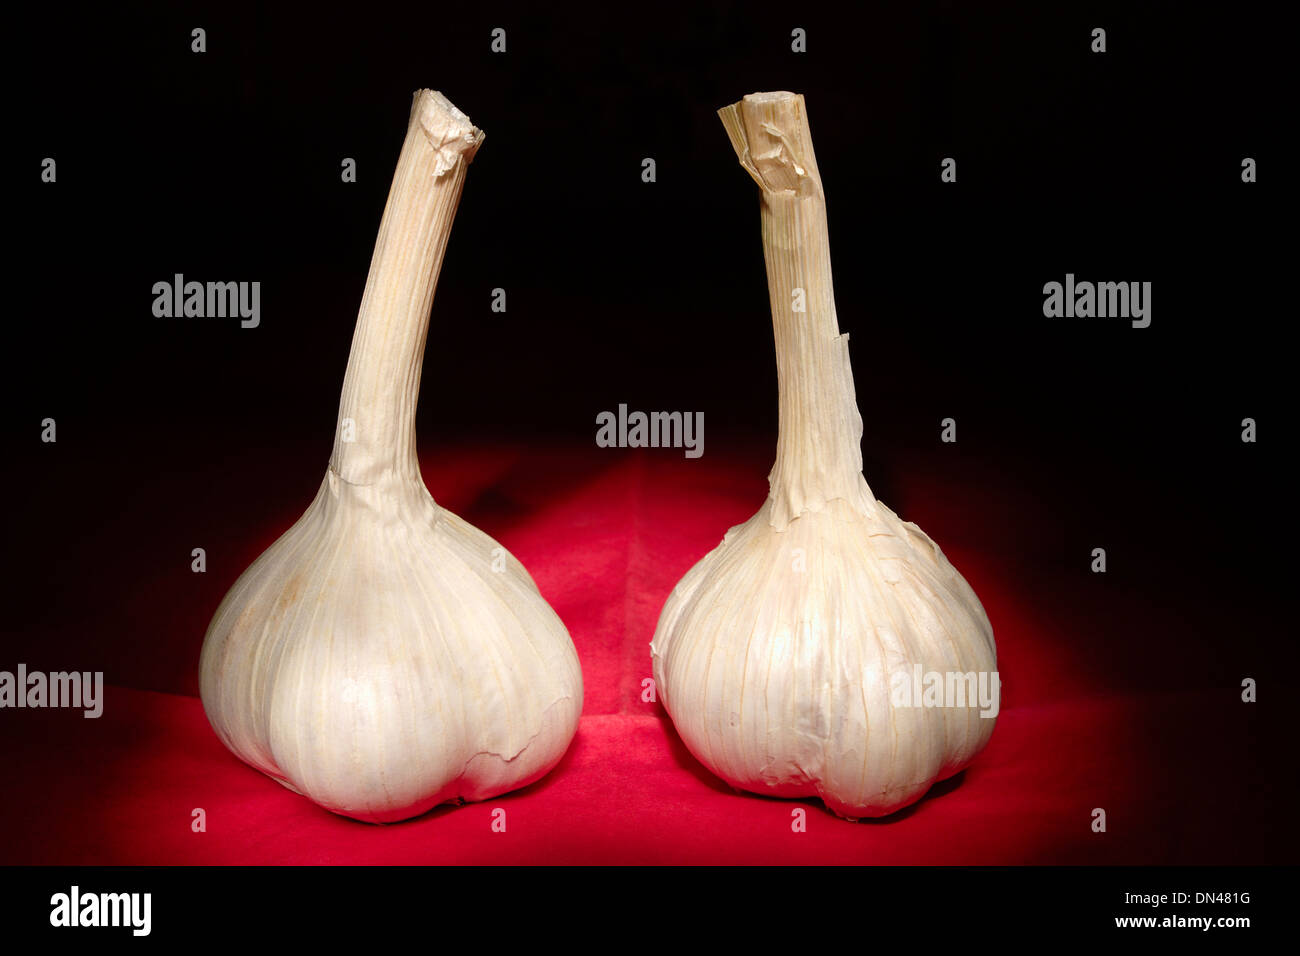 Two garlic bulbs on red and black background still life. Stock Photo